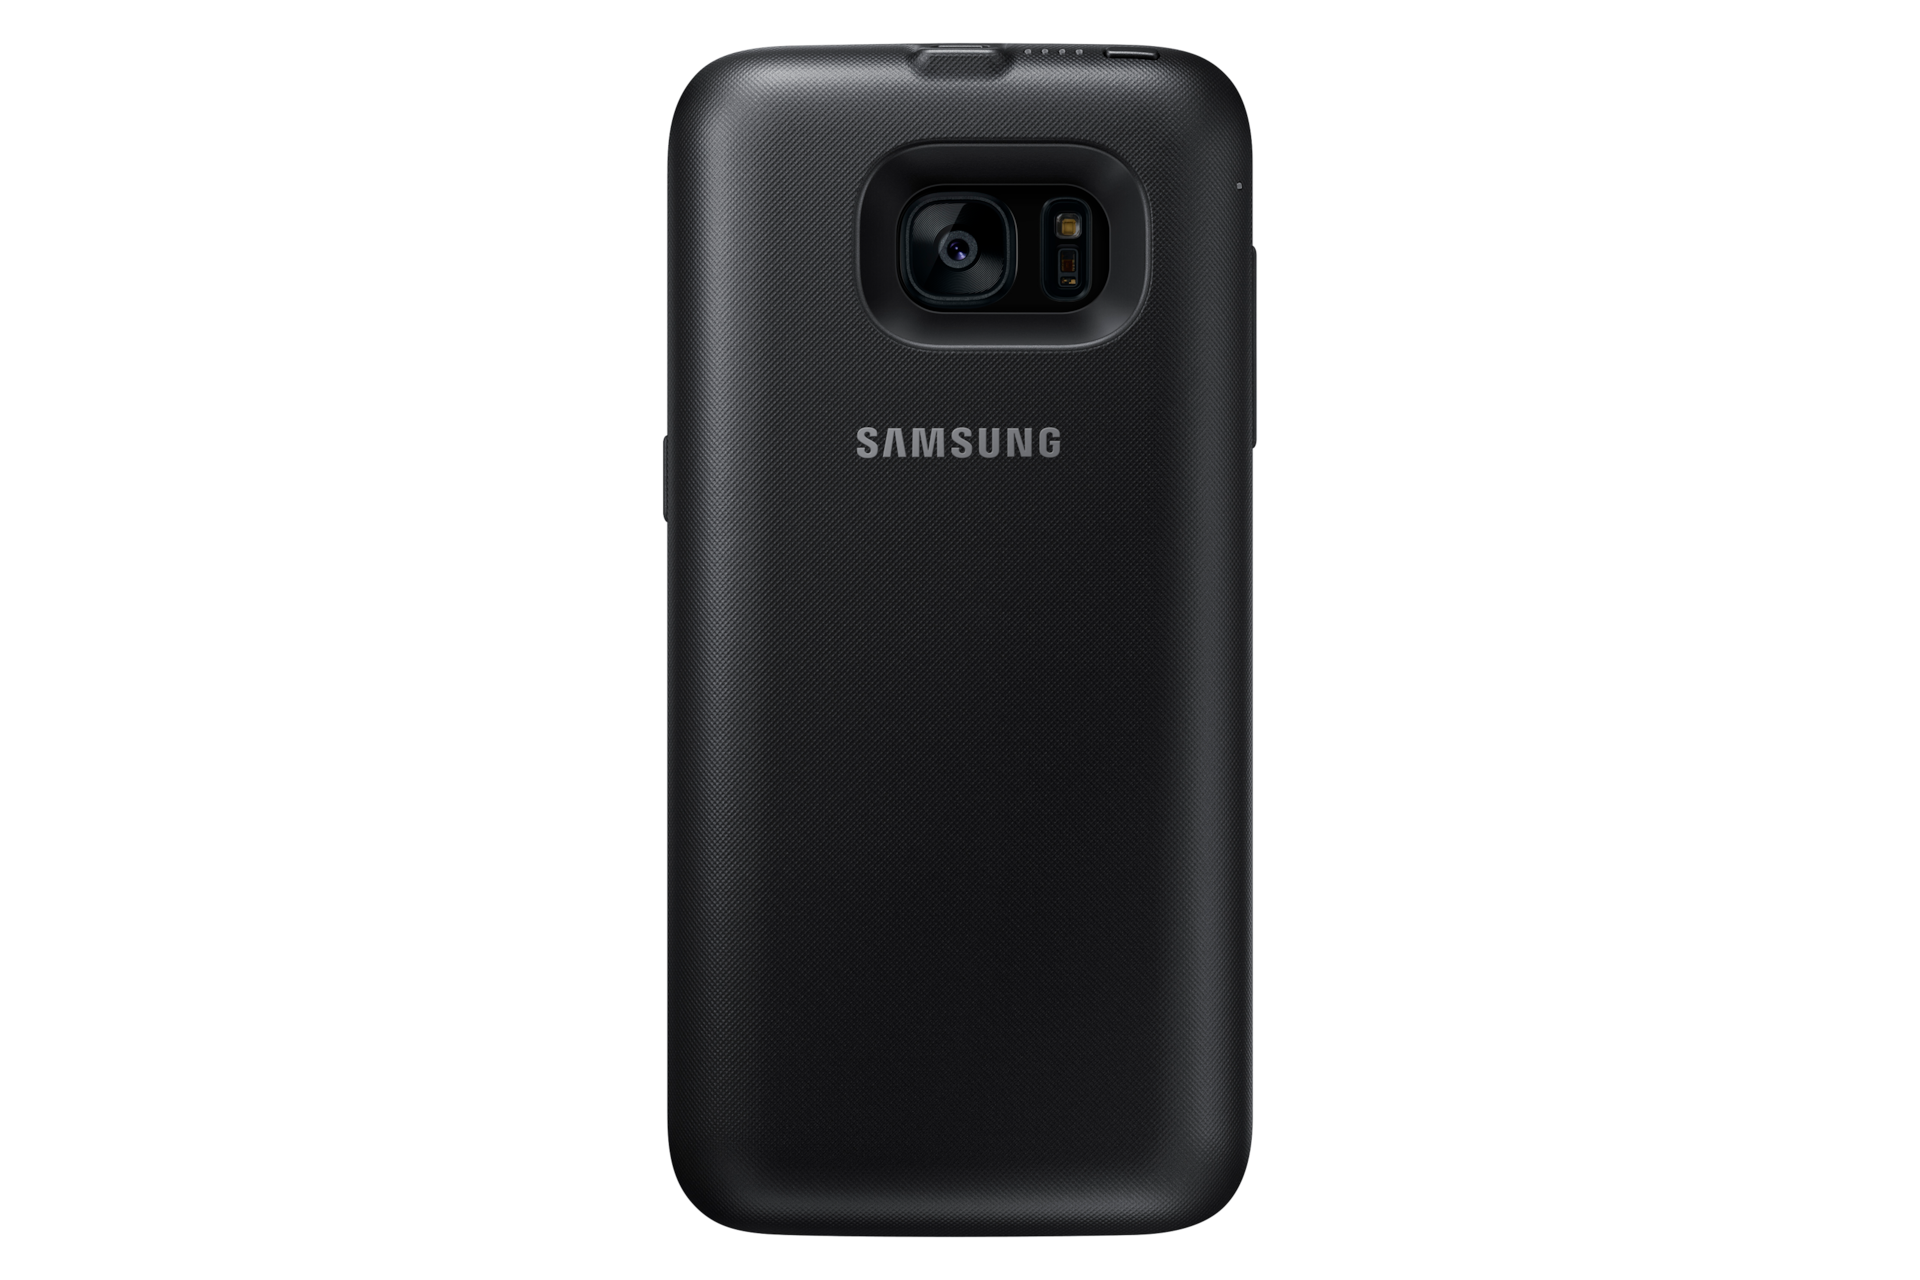 coque samsung s7 compatible induction